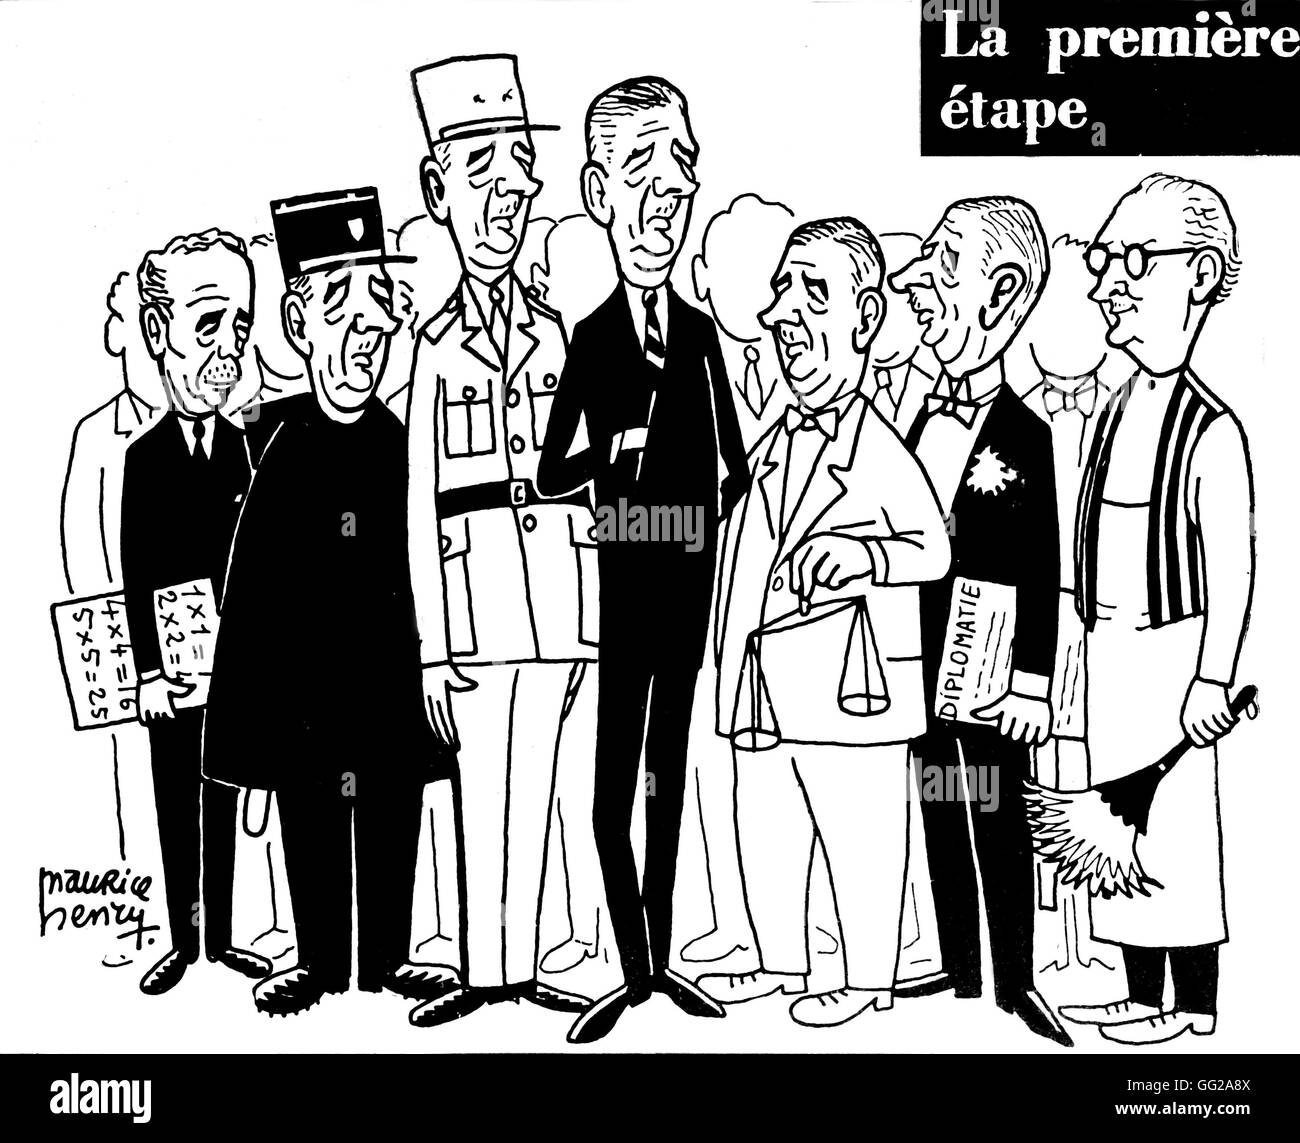 Caricature by Maurice Henry of the French government of De Gaulle, Pinay... June 4, 1958 France Paris, Bibliothèque Nationale Stock Photo